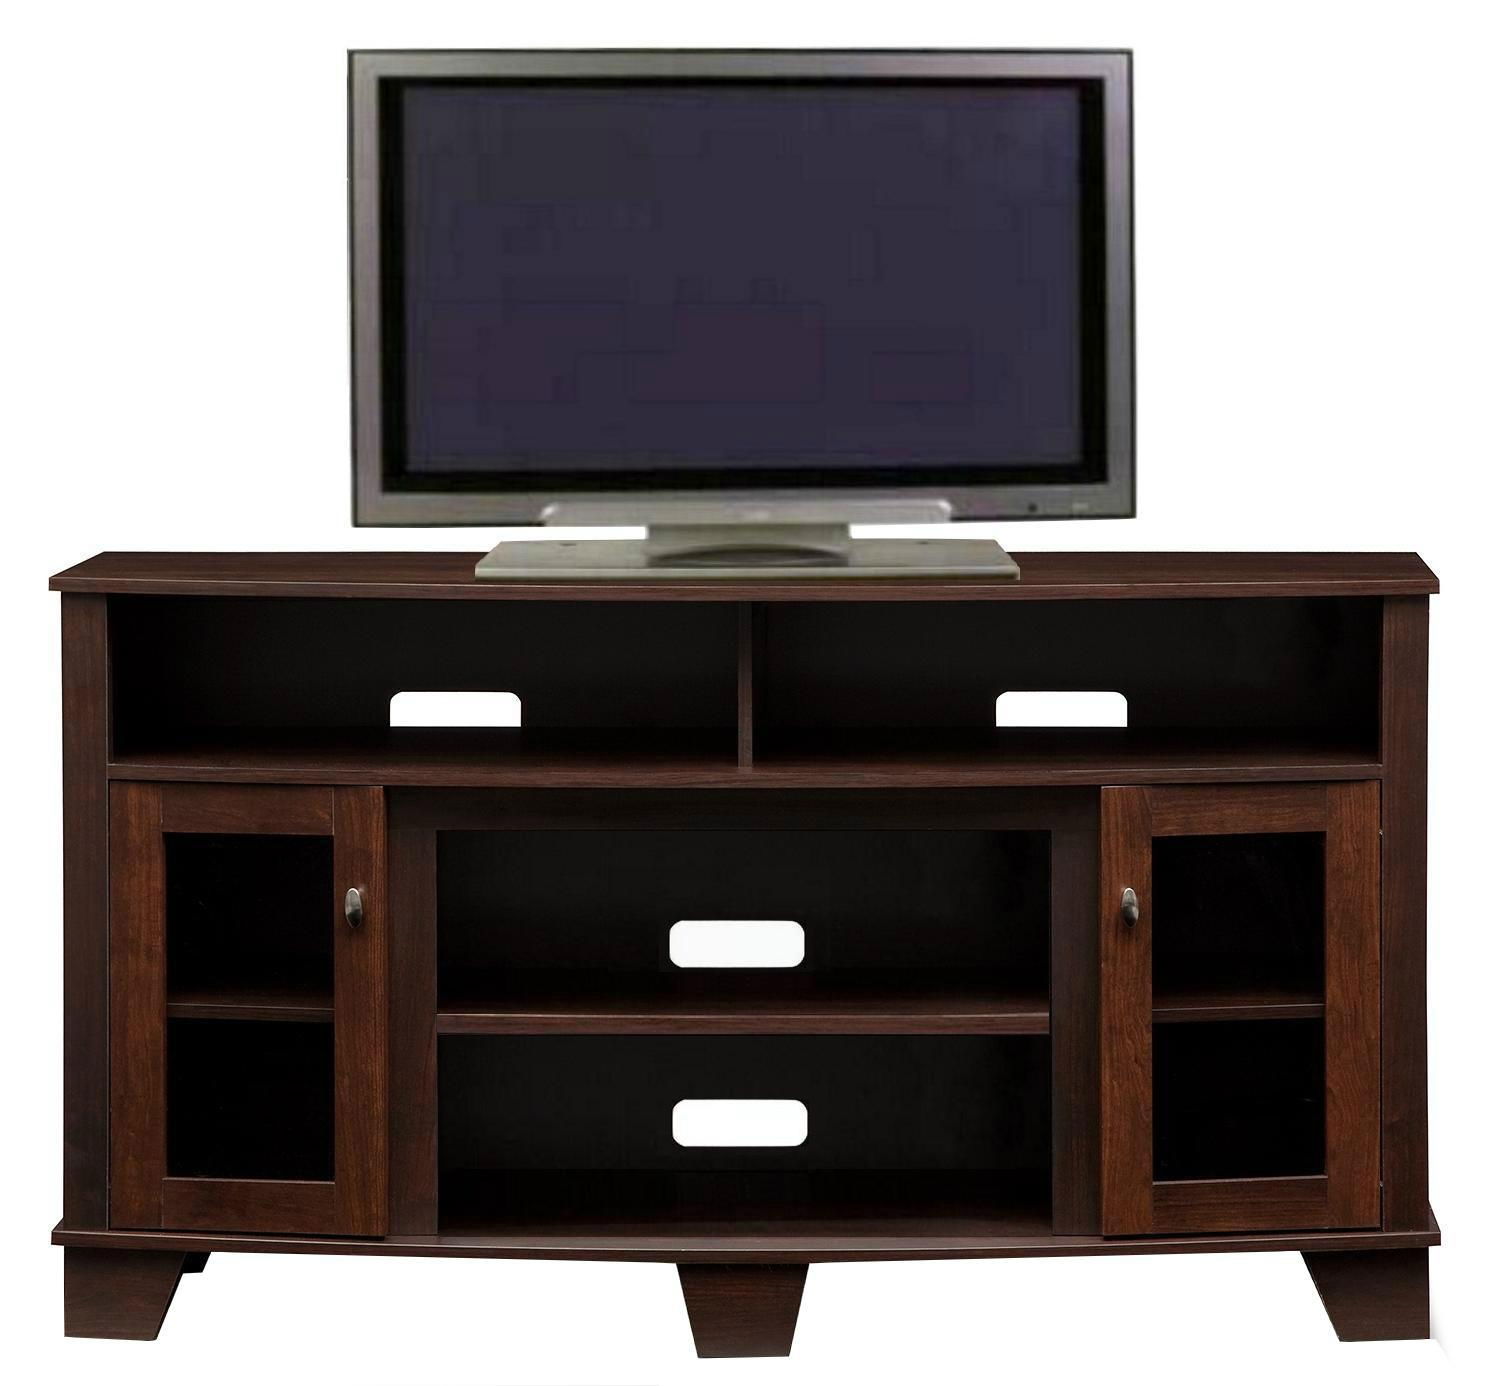 60 inch Charcoal Grey Modern Tall TV Stand Furniture 5